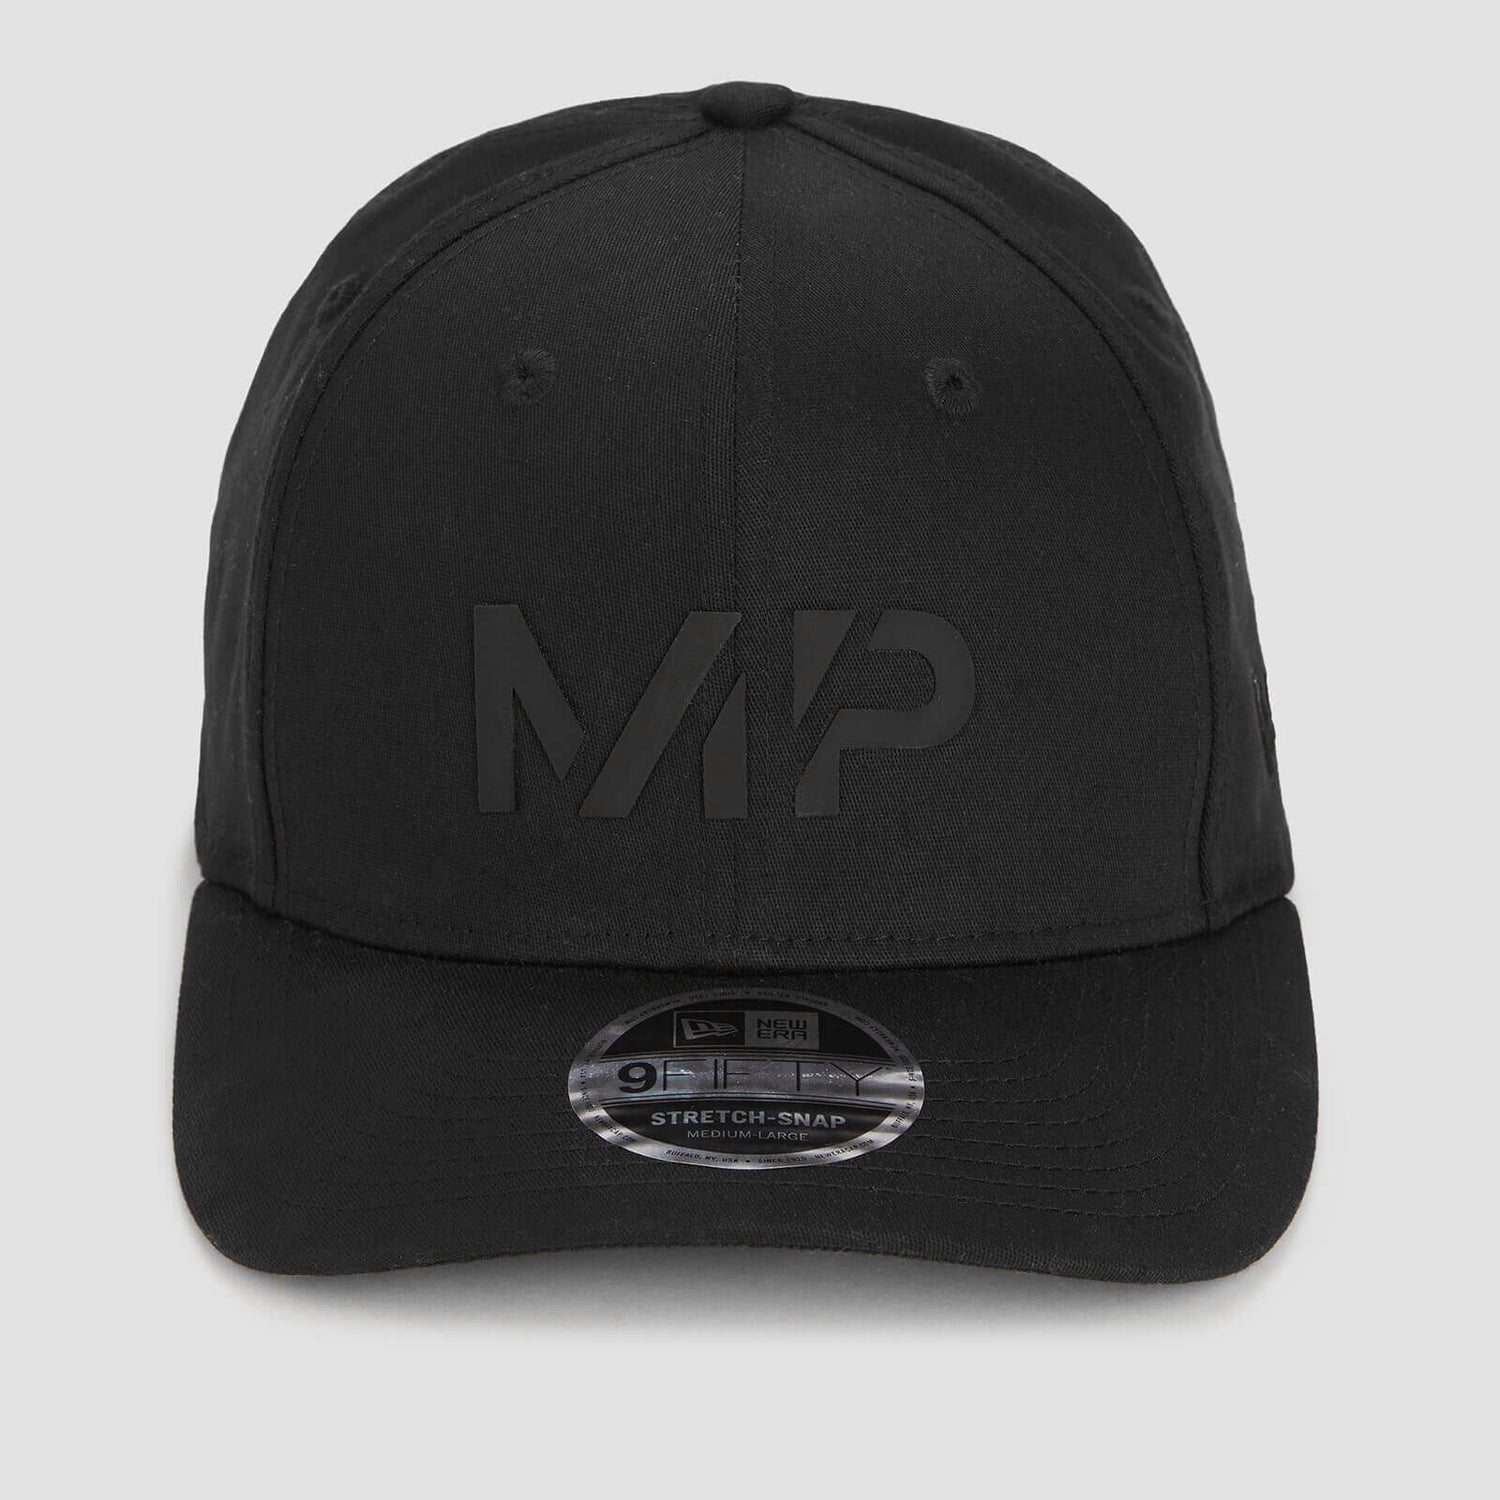 MP New Era 9FIFTY Stretch Snapback - must/must - S-M